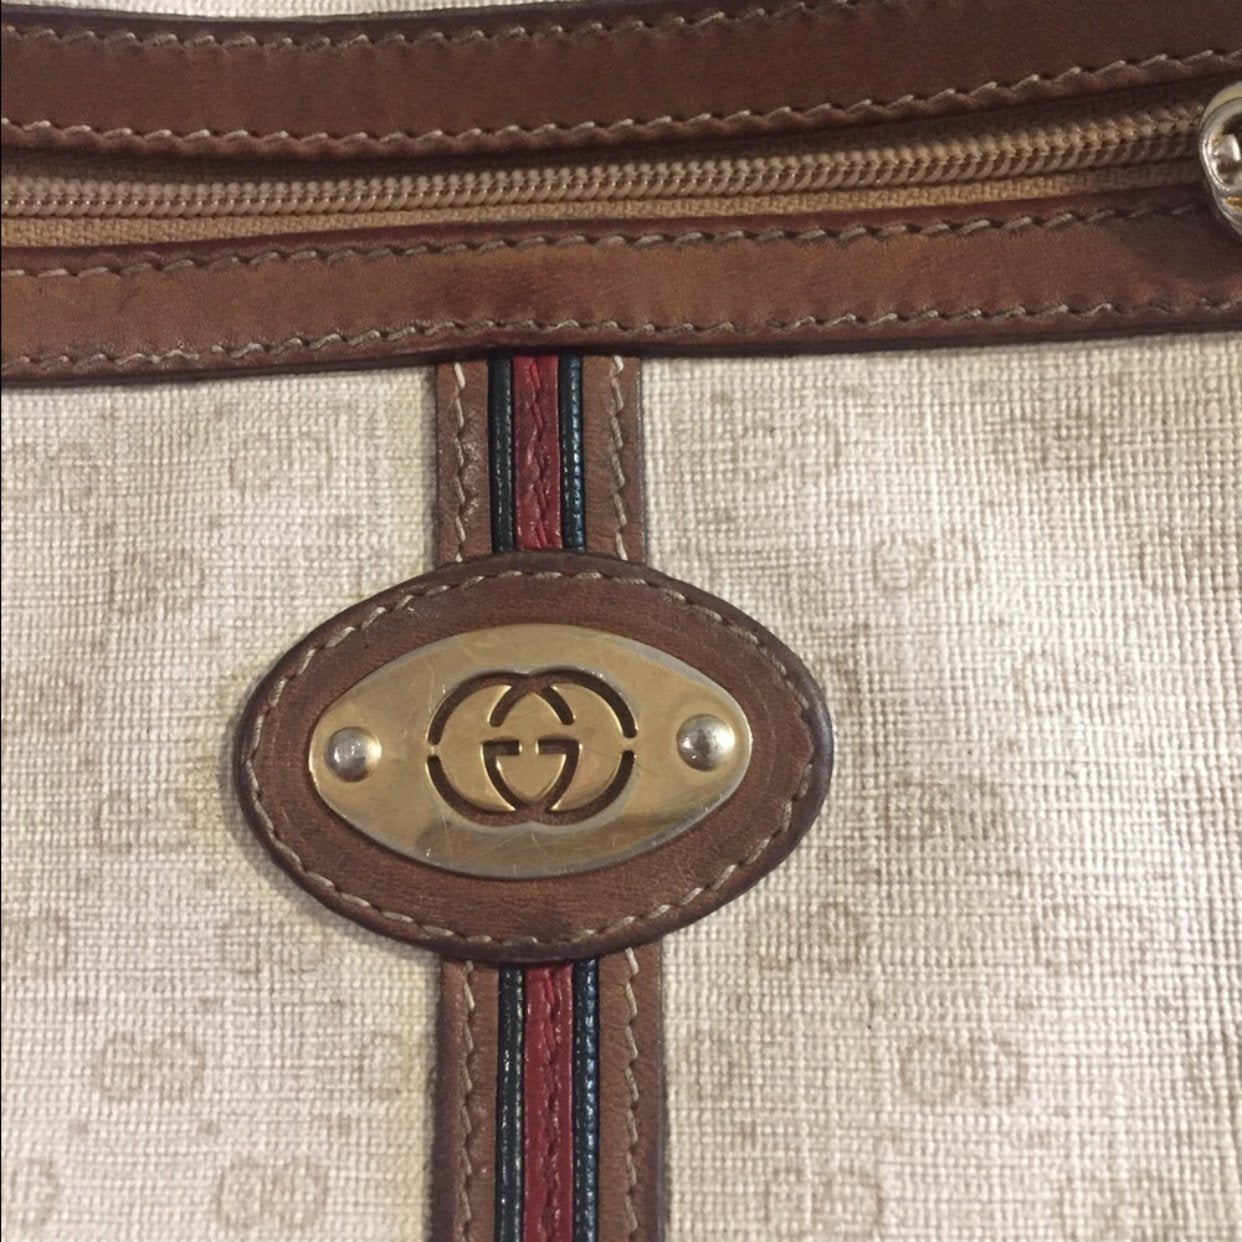 Vintage GUCCI Ophidia GG Supreme Bag at Rice and Beans Vintage